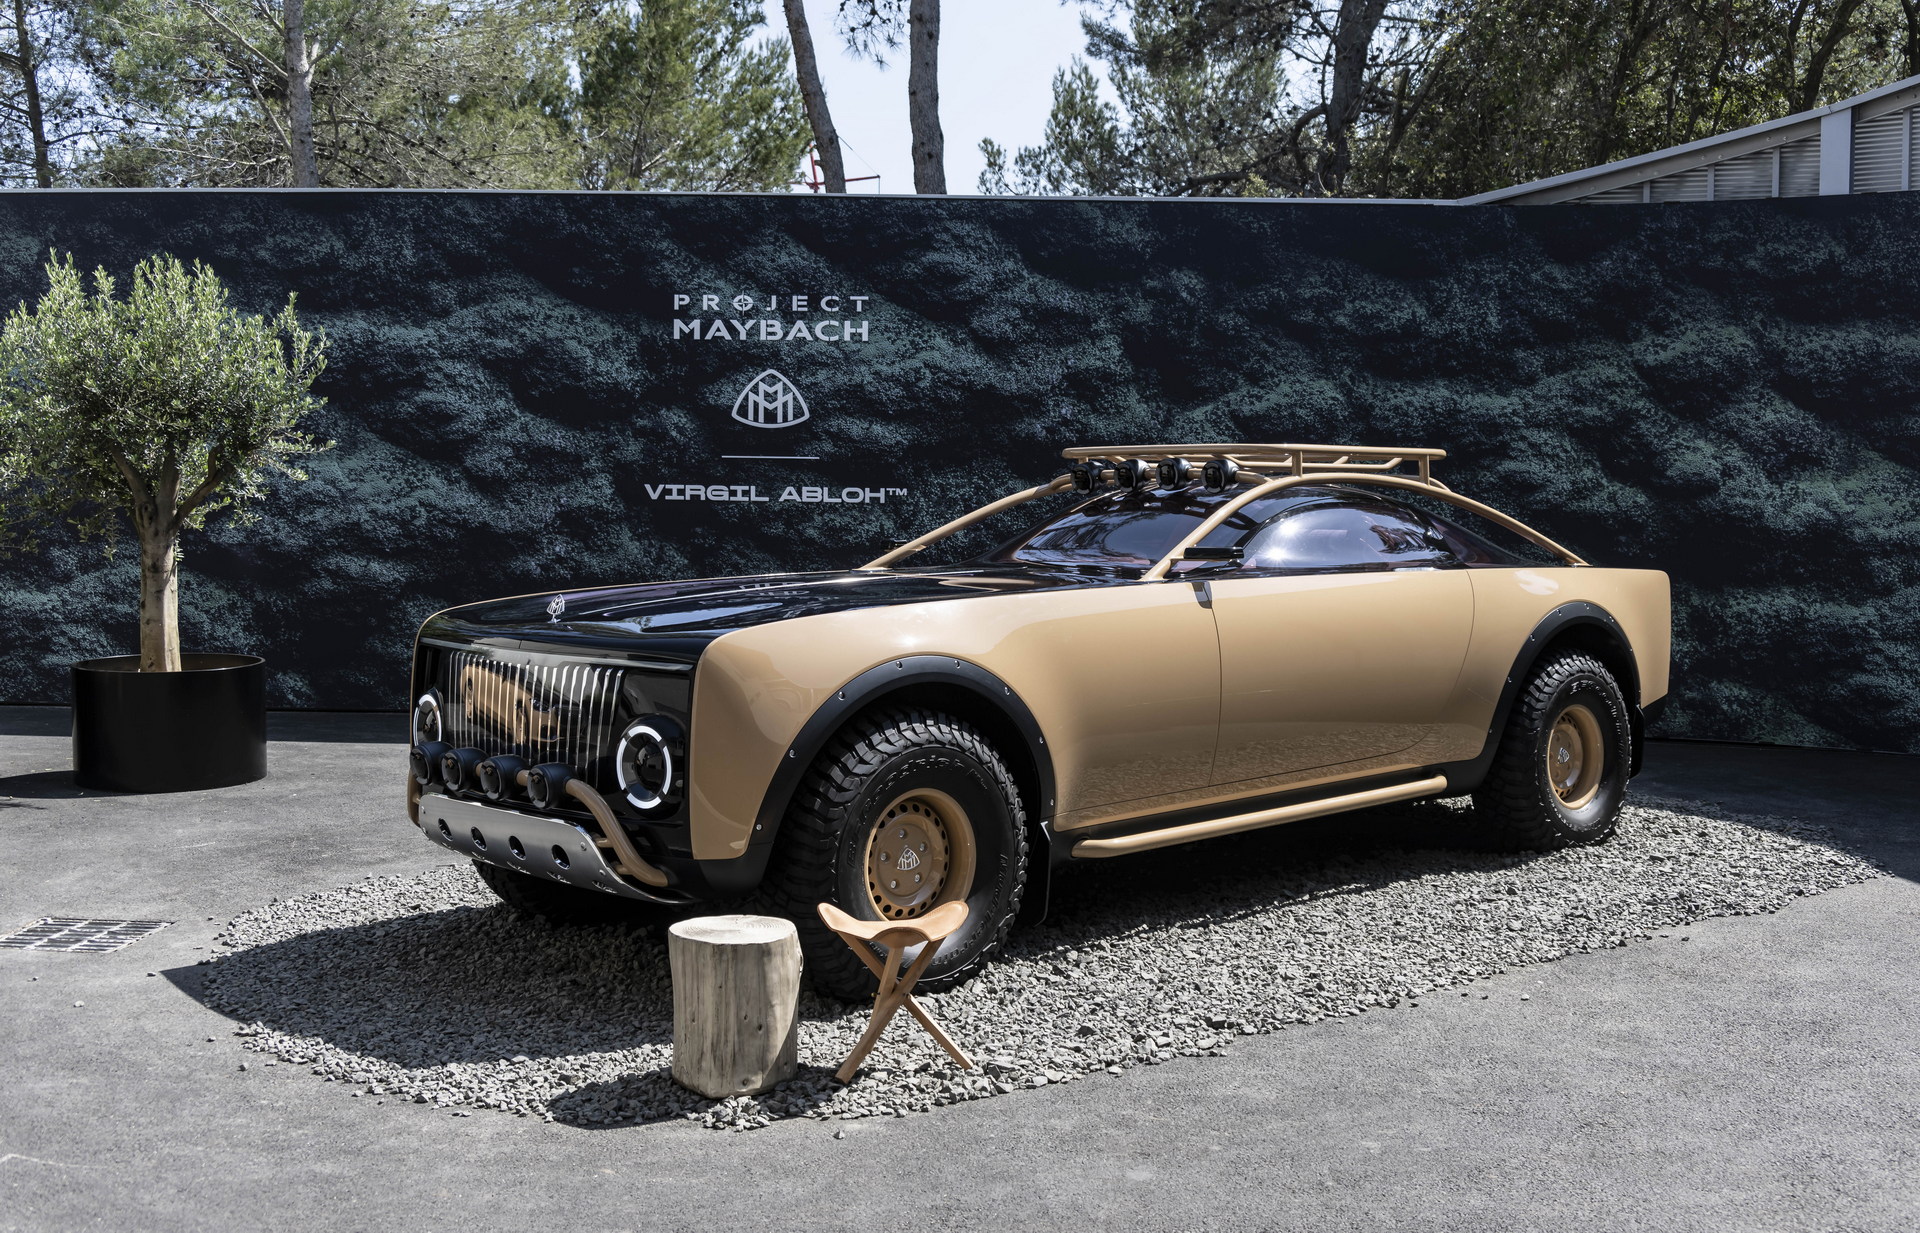 Virgil Abloh-designed project Maybach electric car unveiled by  Mercedes-Benz